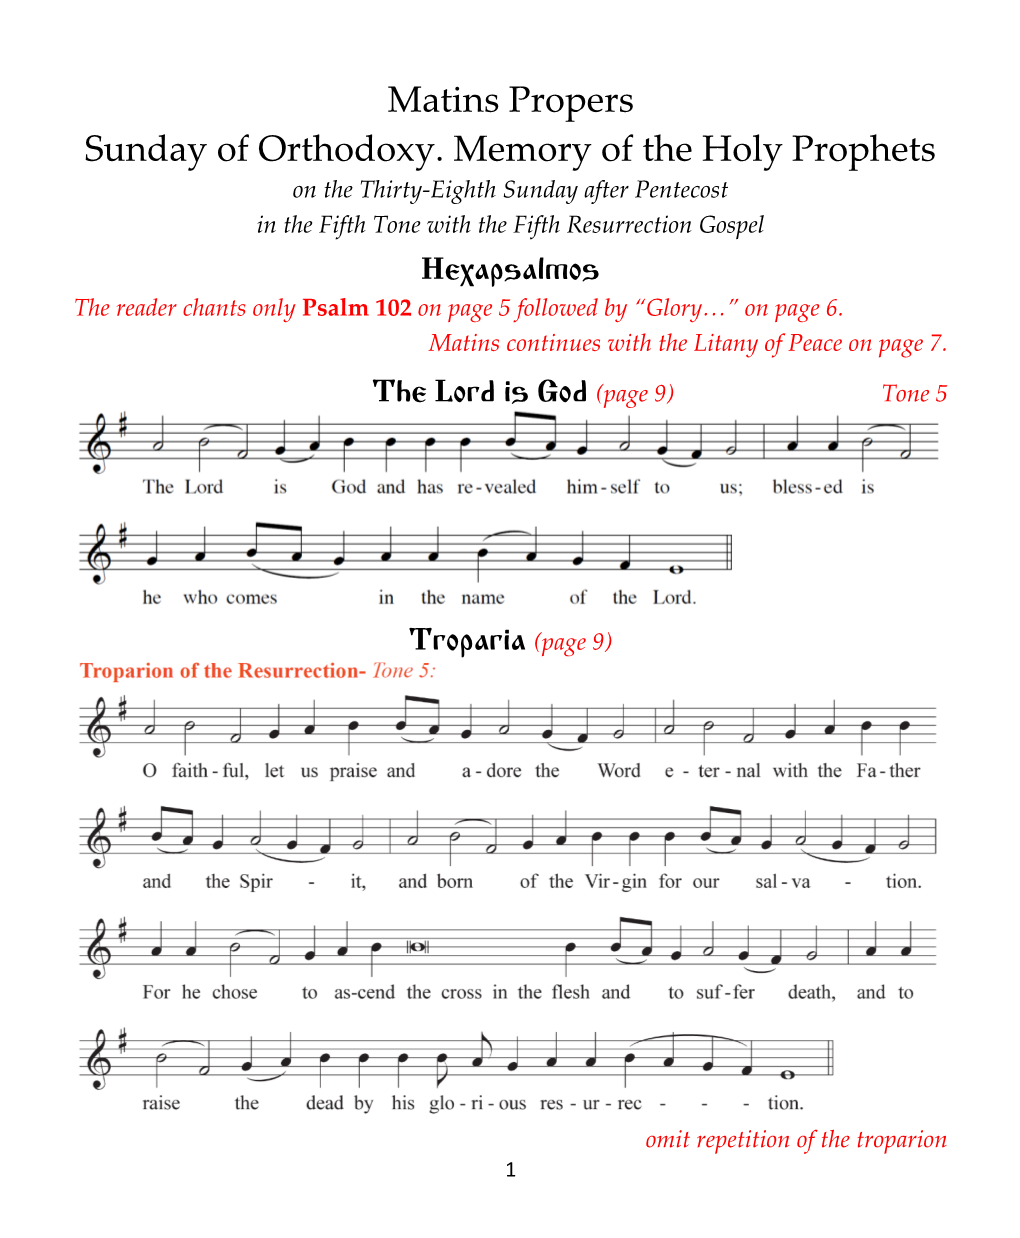 Matins Propers for the Sunday of Orthodoxy. Tone 5